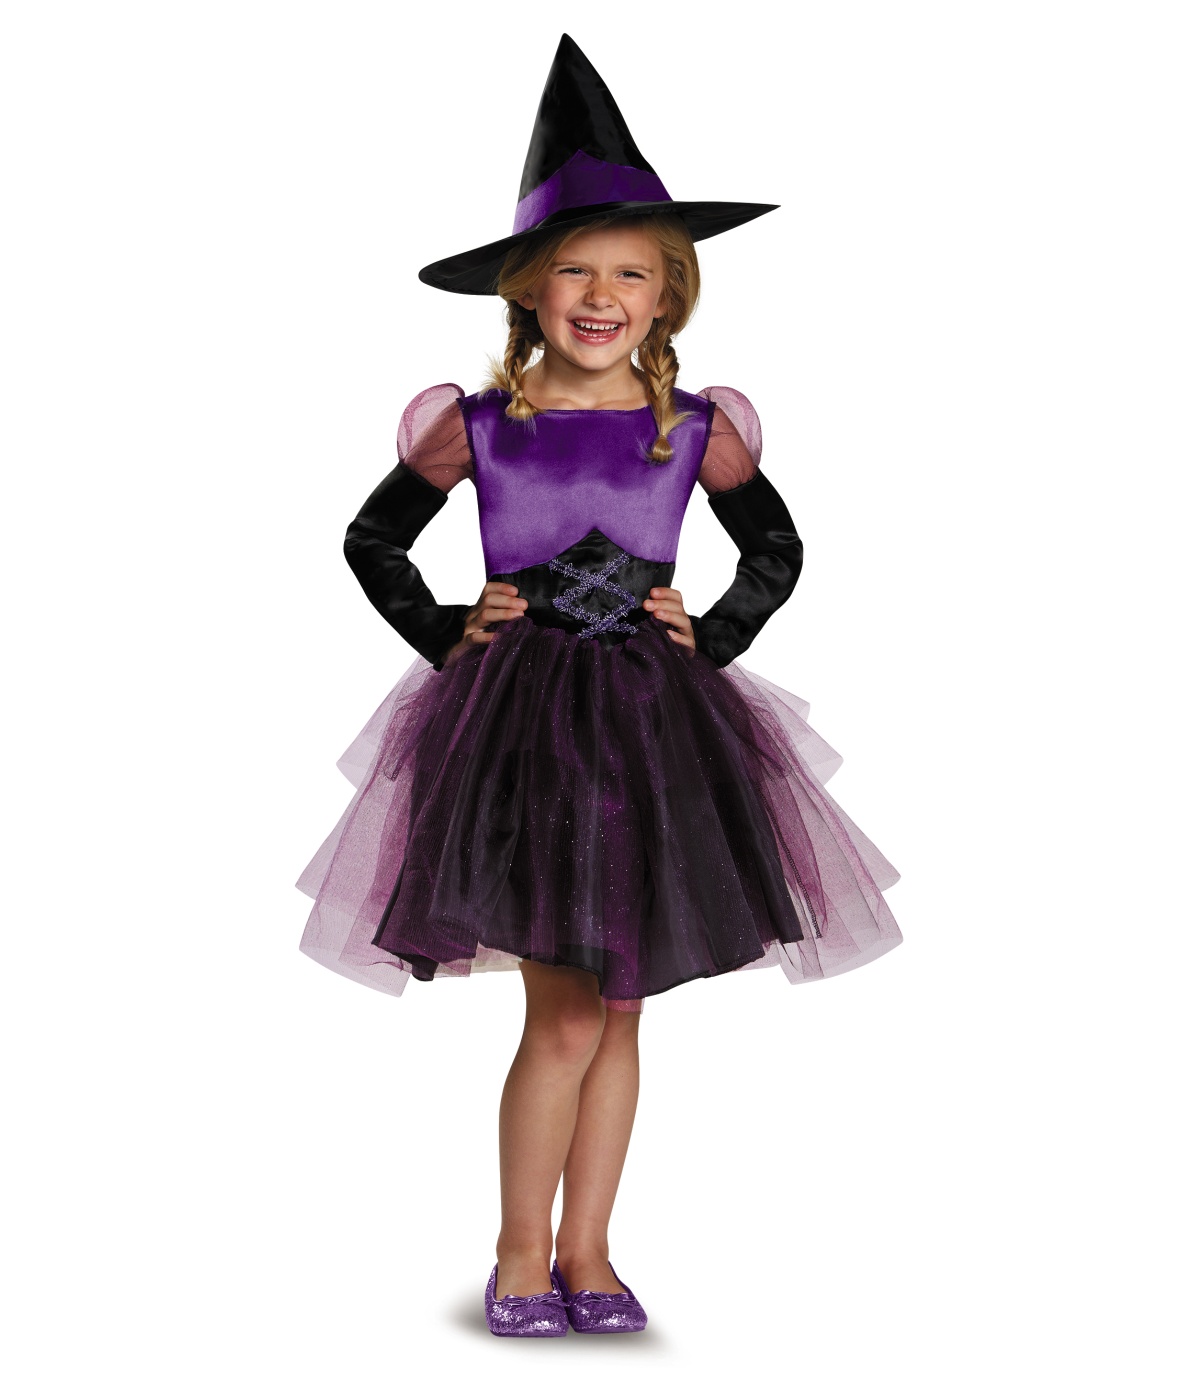  Girls Baby Prancing Witch Costume